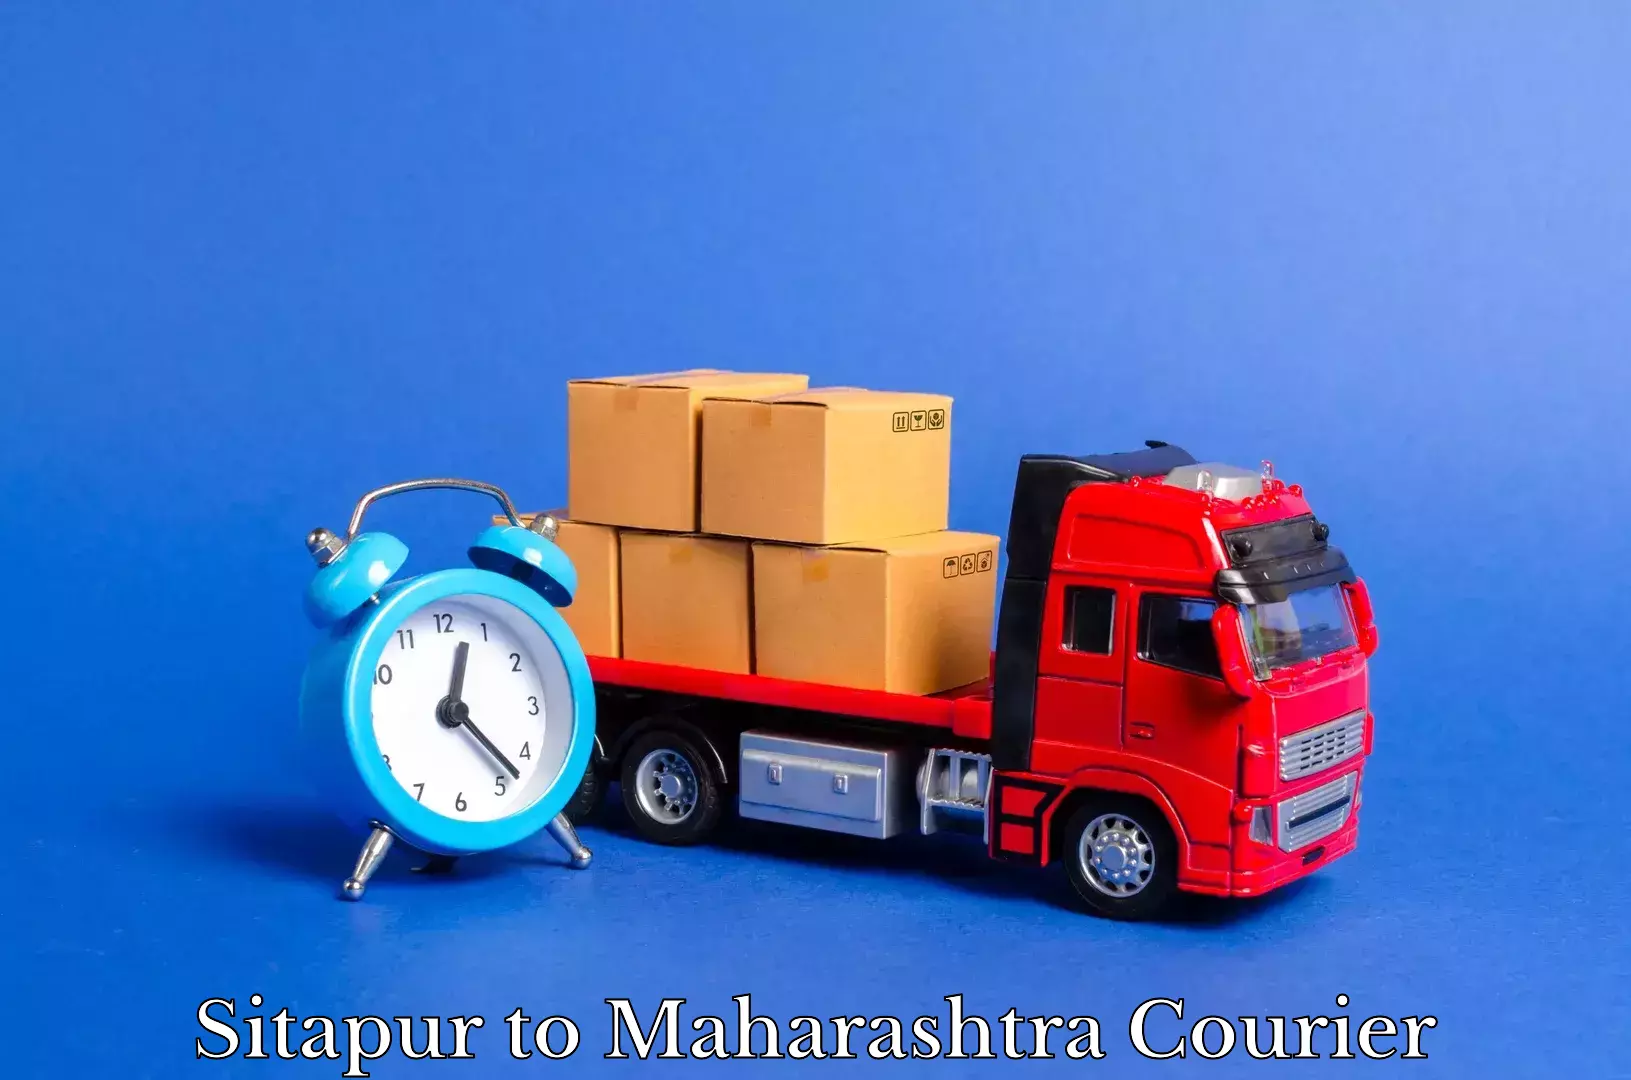 Furniture transport experts in Sitapur to Maharashtra